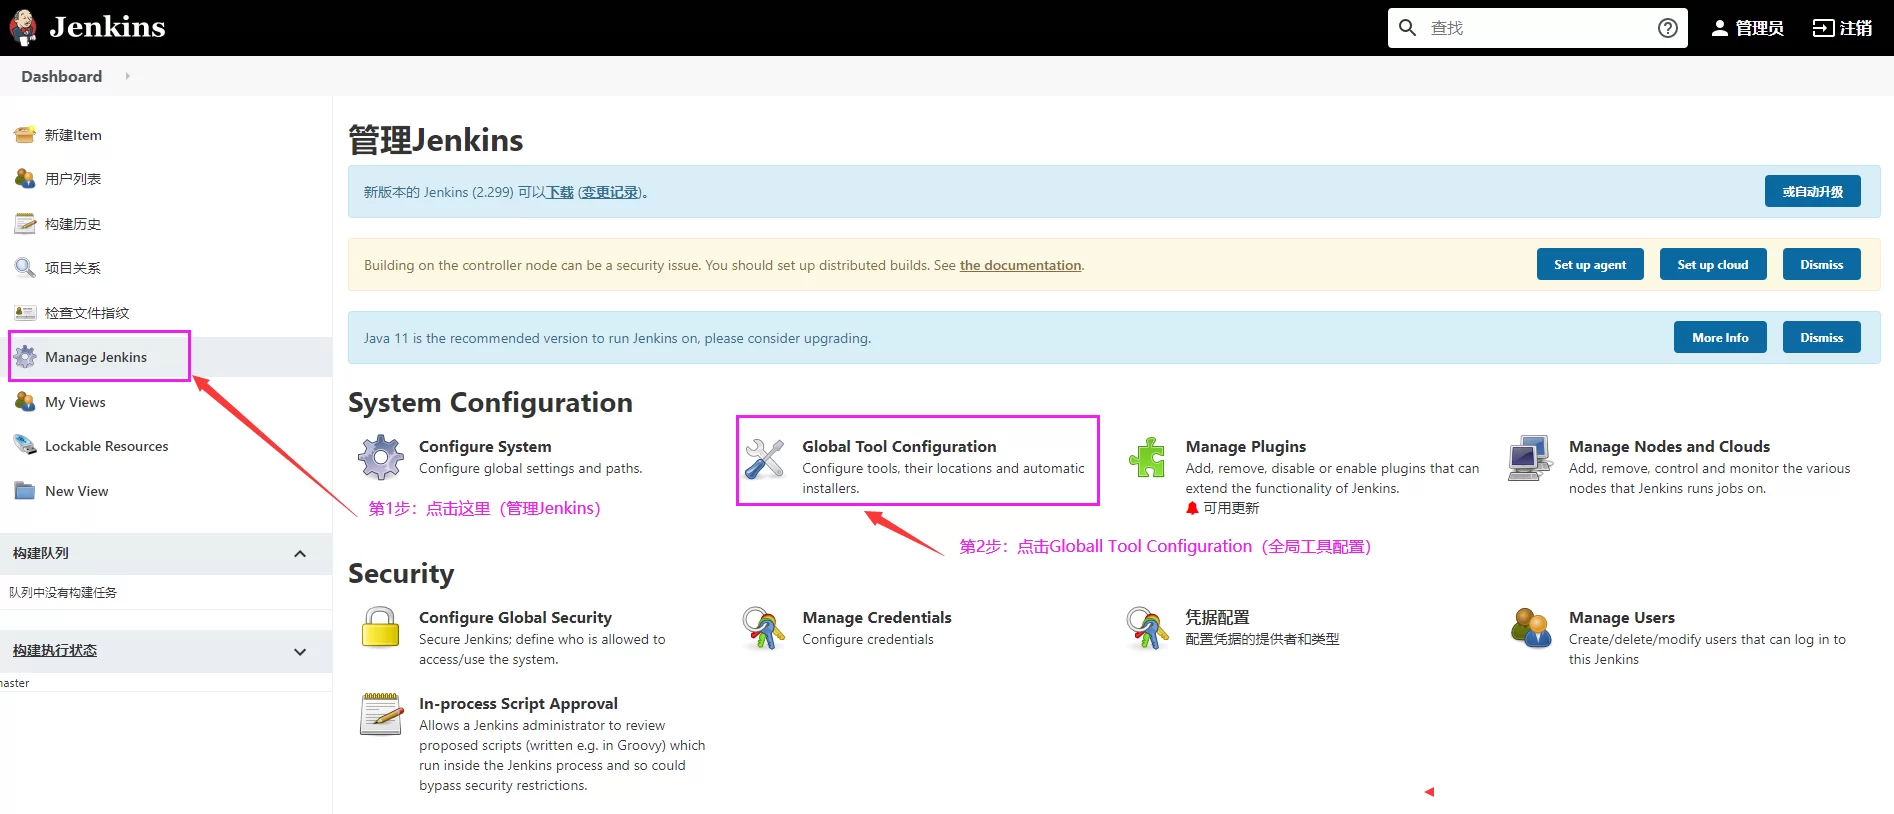 How to configure Jenkins MSbuildJenkins continuous integration asp.net website website and automatically deploy to IIS tutorial version 2021